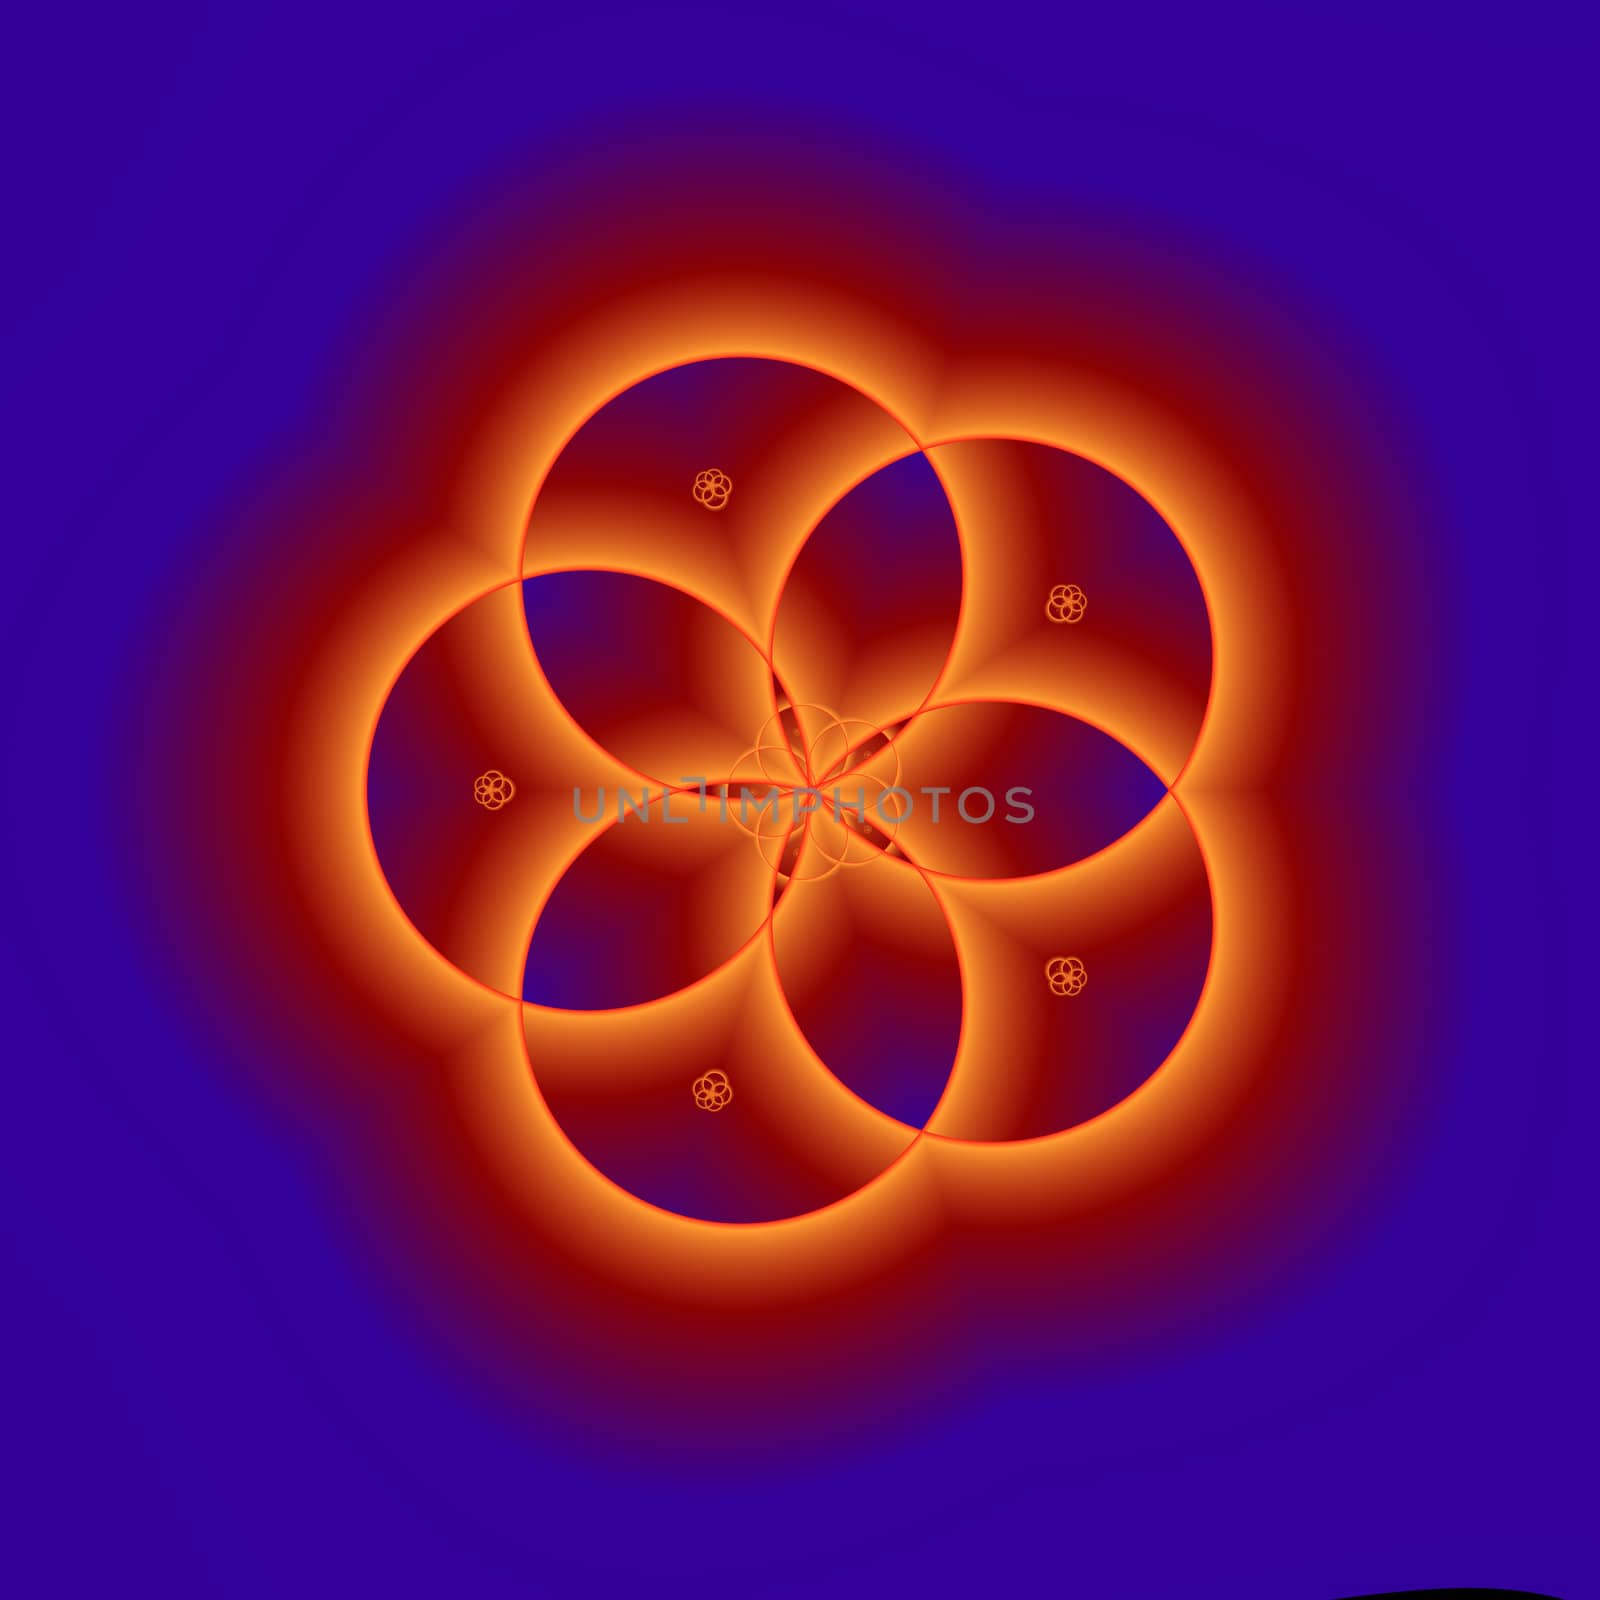 A star shaped circular fractal floating on a blue background.